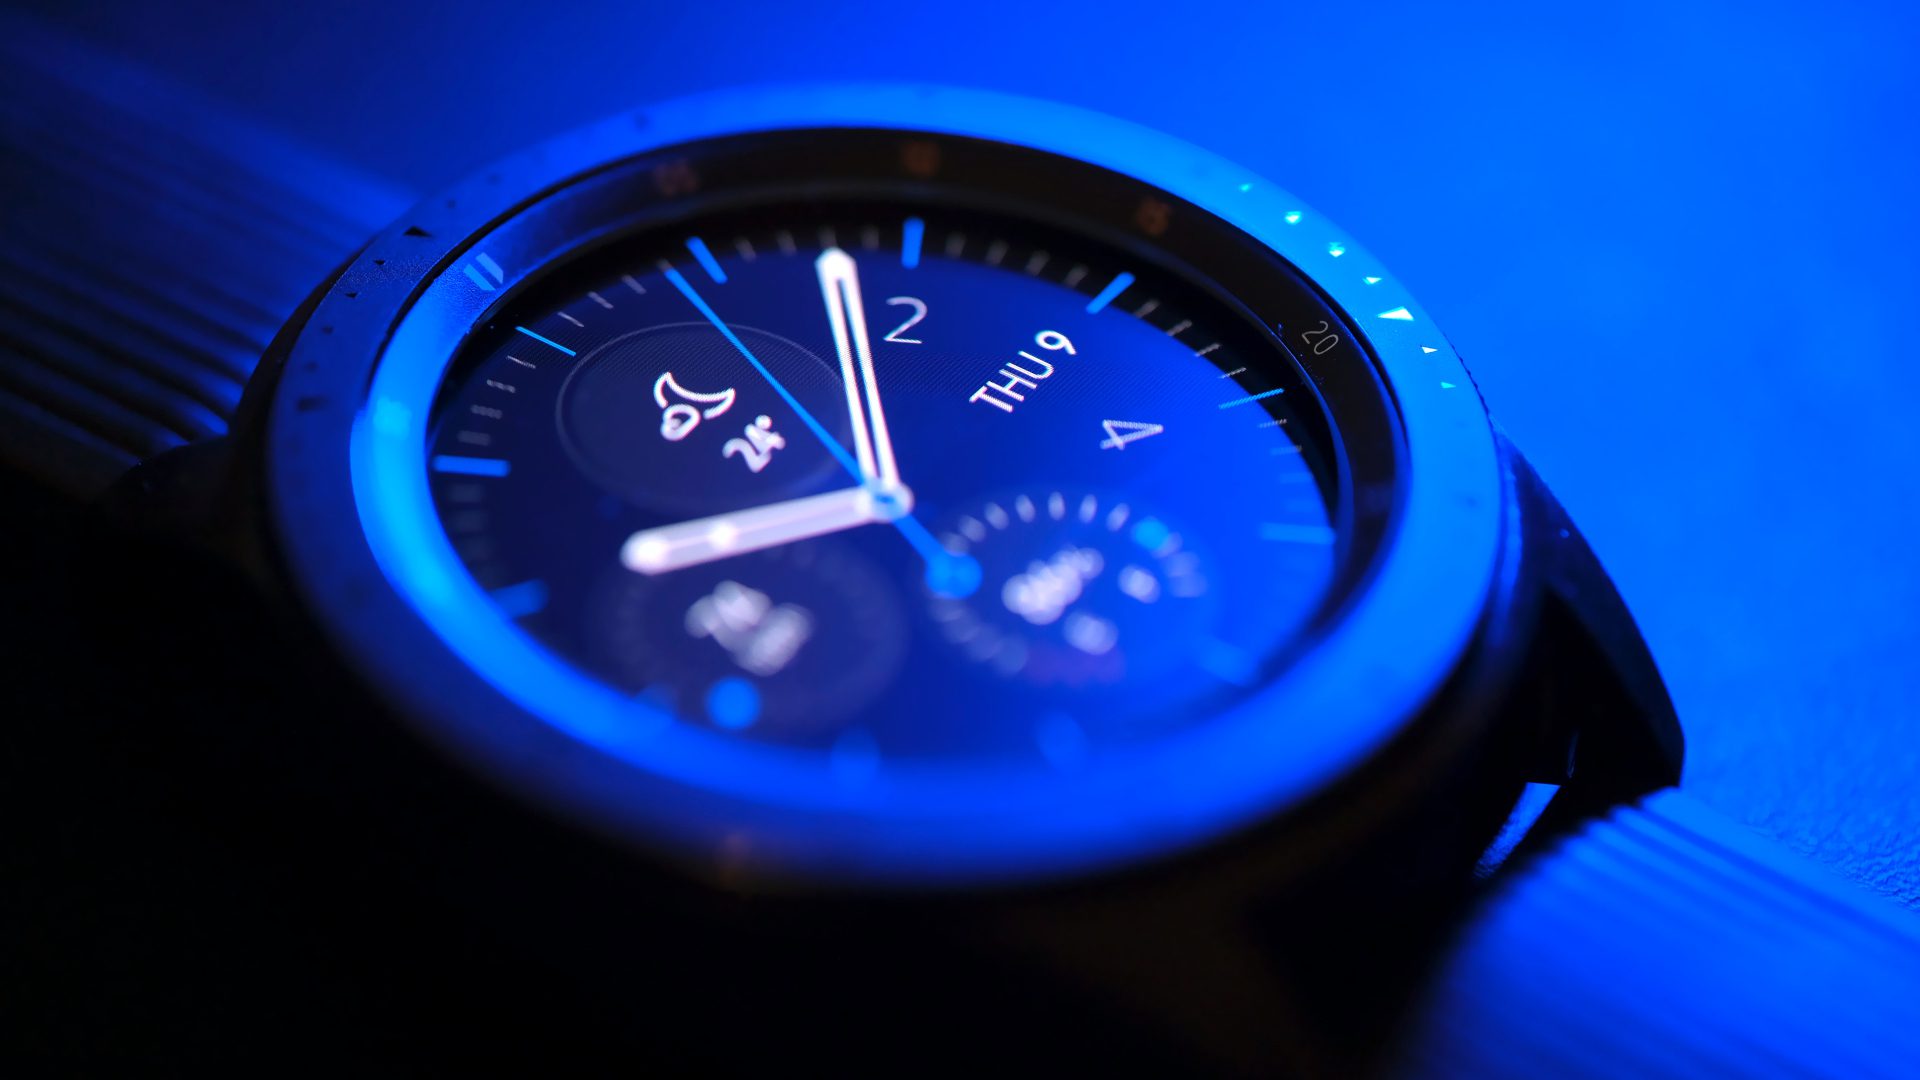 How to Enable Pressure on Samsung Galaxy Watch 4 - Guiding Tech